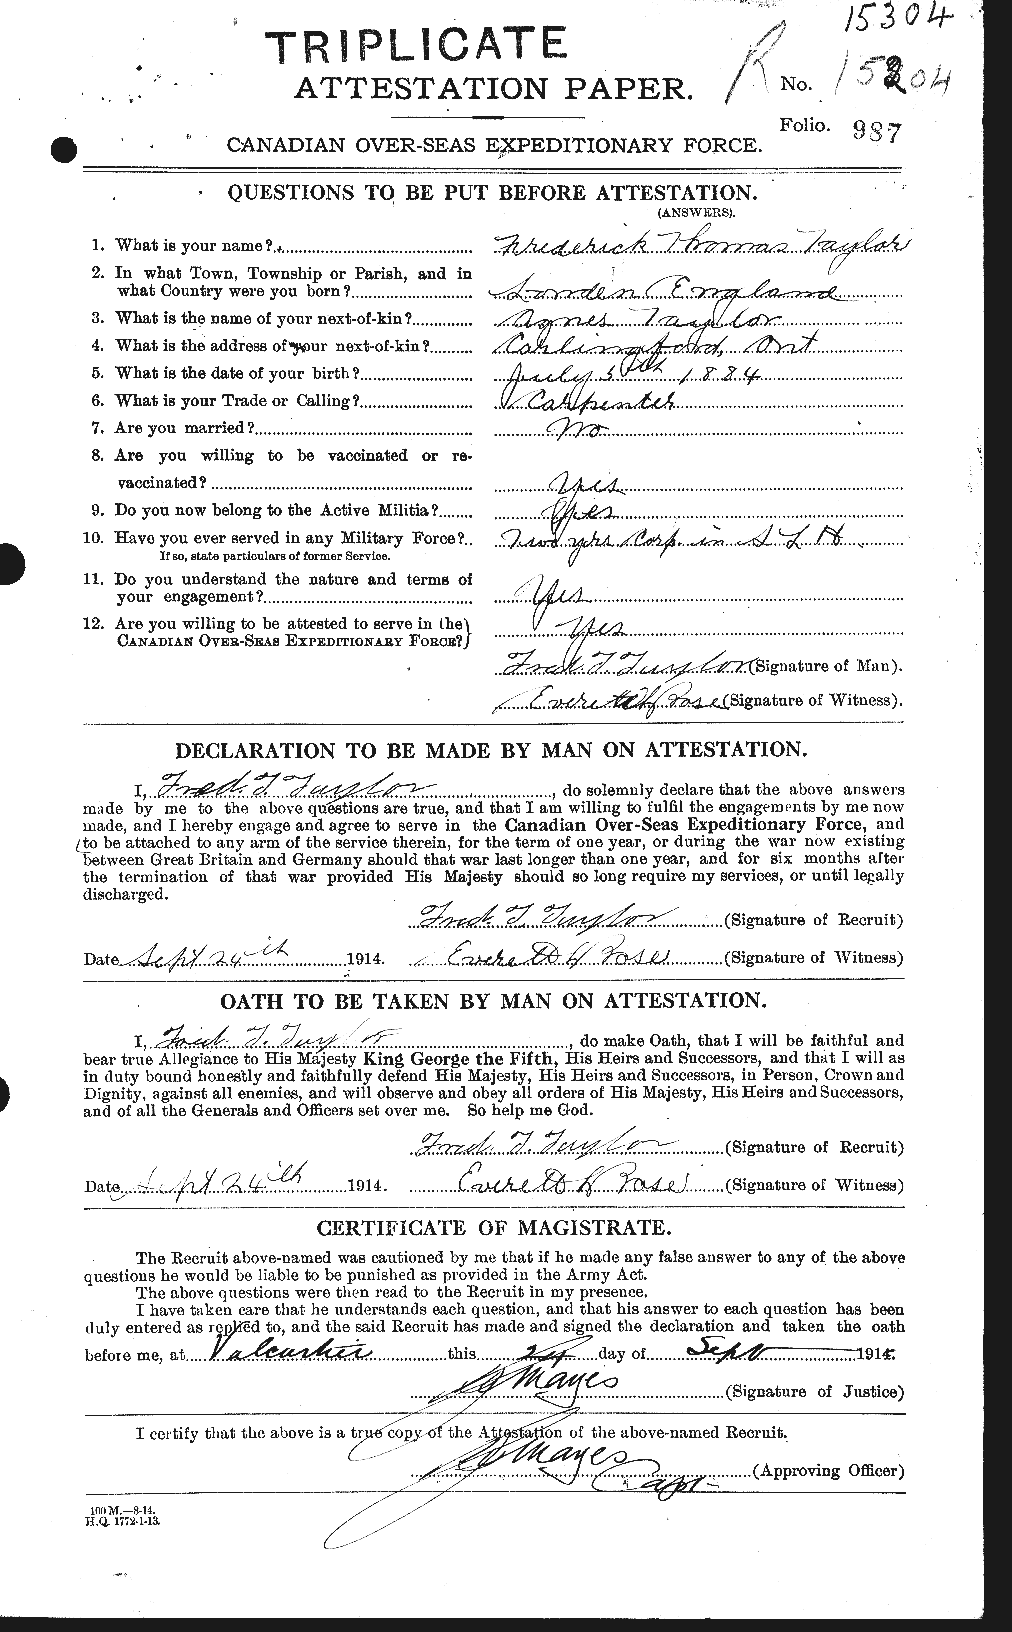 Personnel Records of the First World War - CEF 625820a